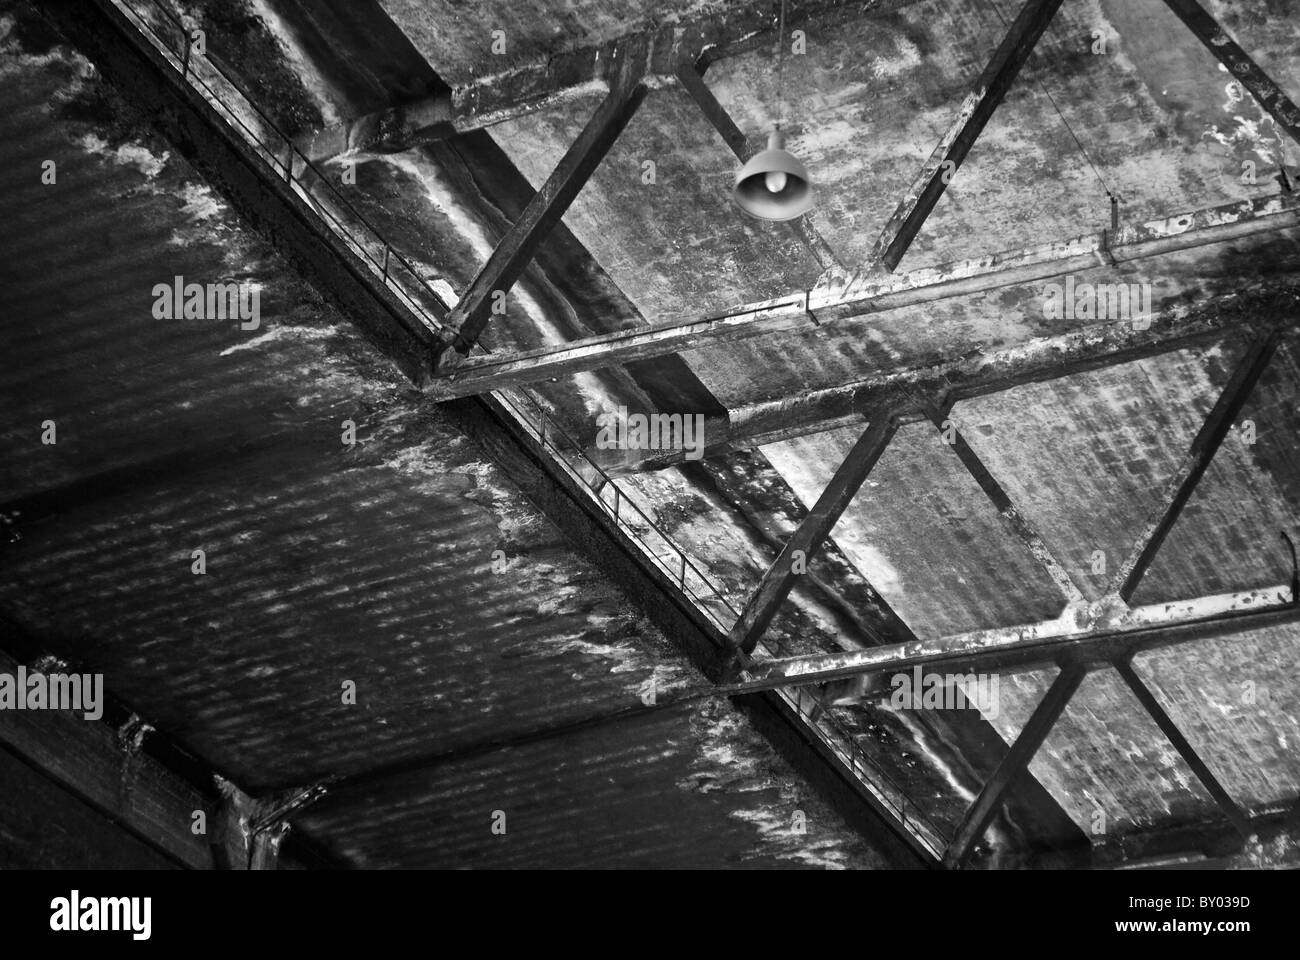 industrial archeology factory subscribed for aluminum production Stock Photo